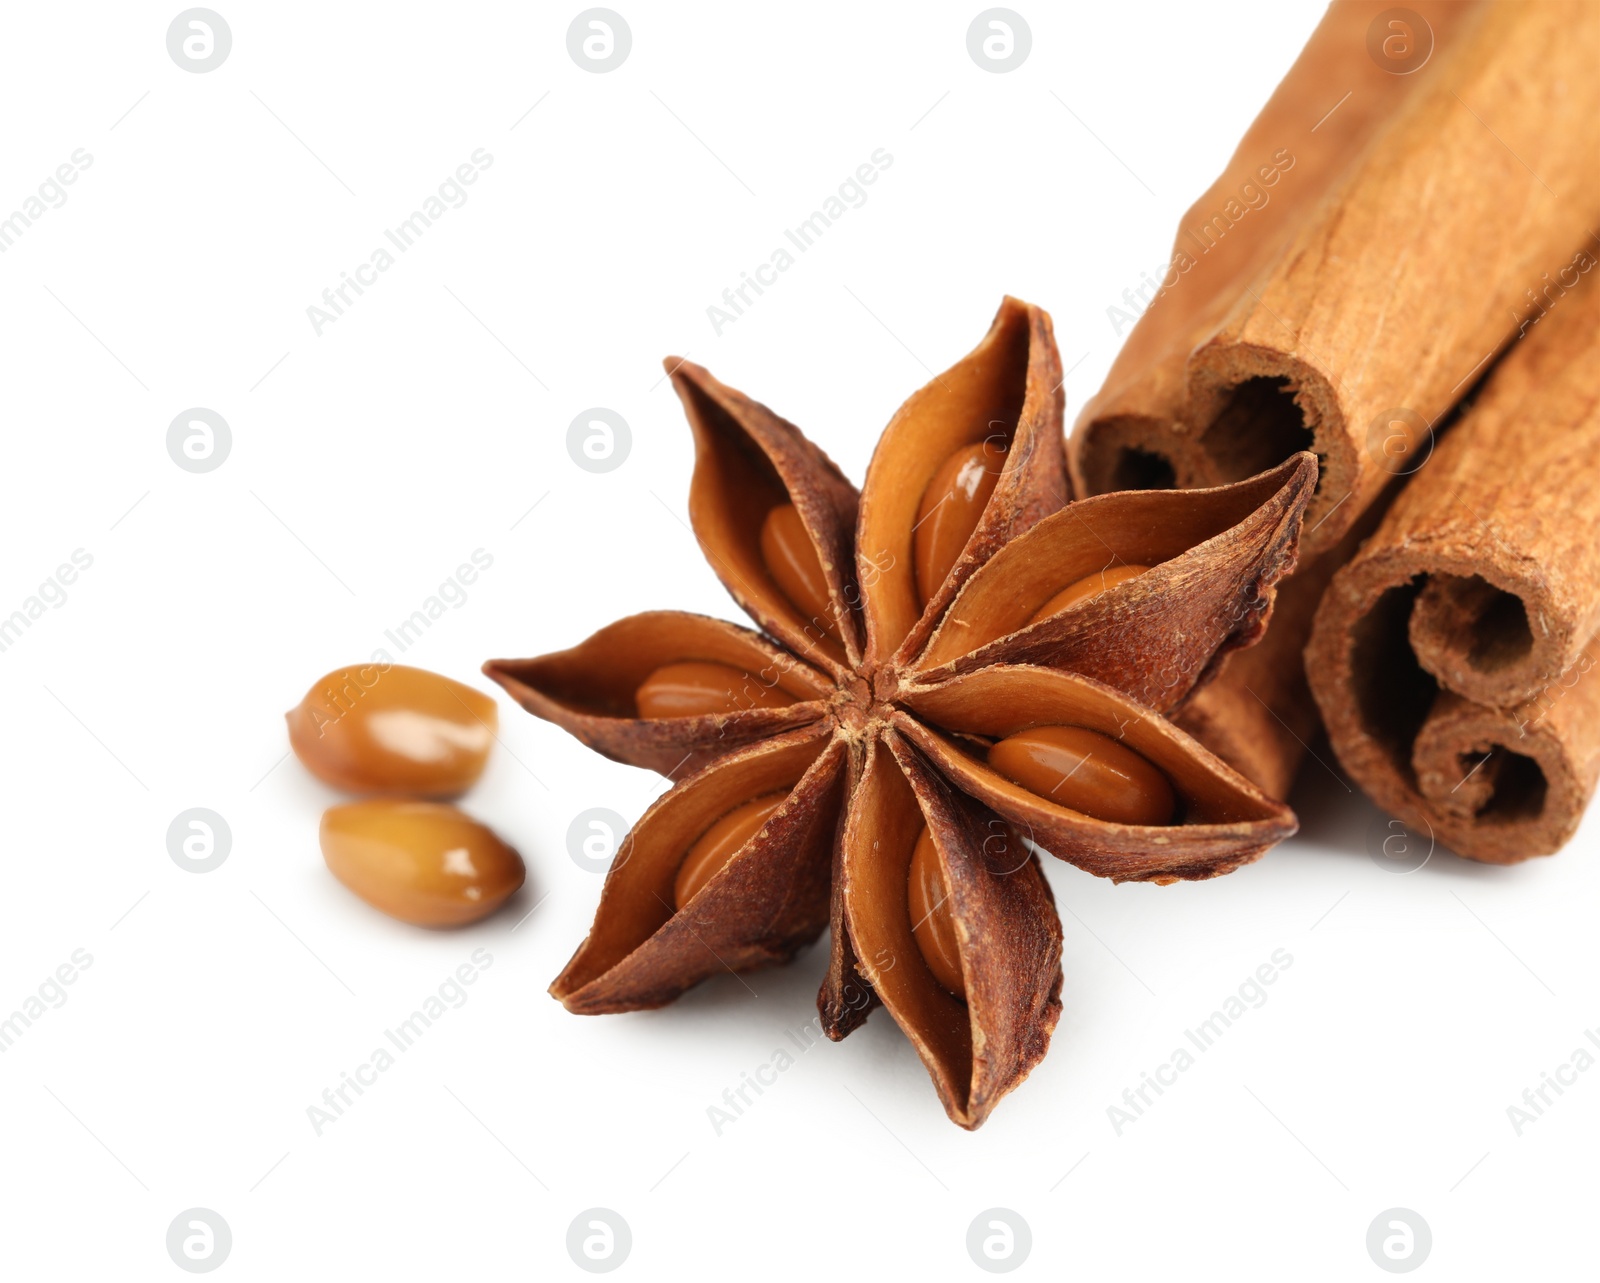 Photo of Dry anise star and cinnamon sticks on white background, closeup